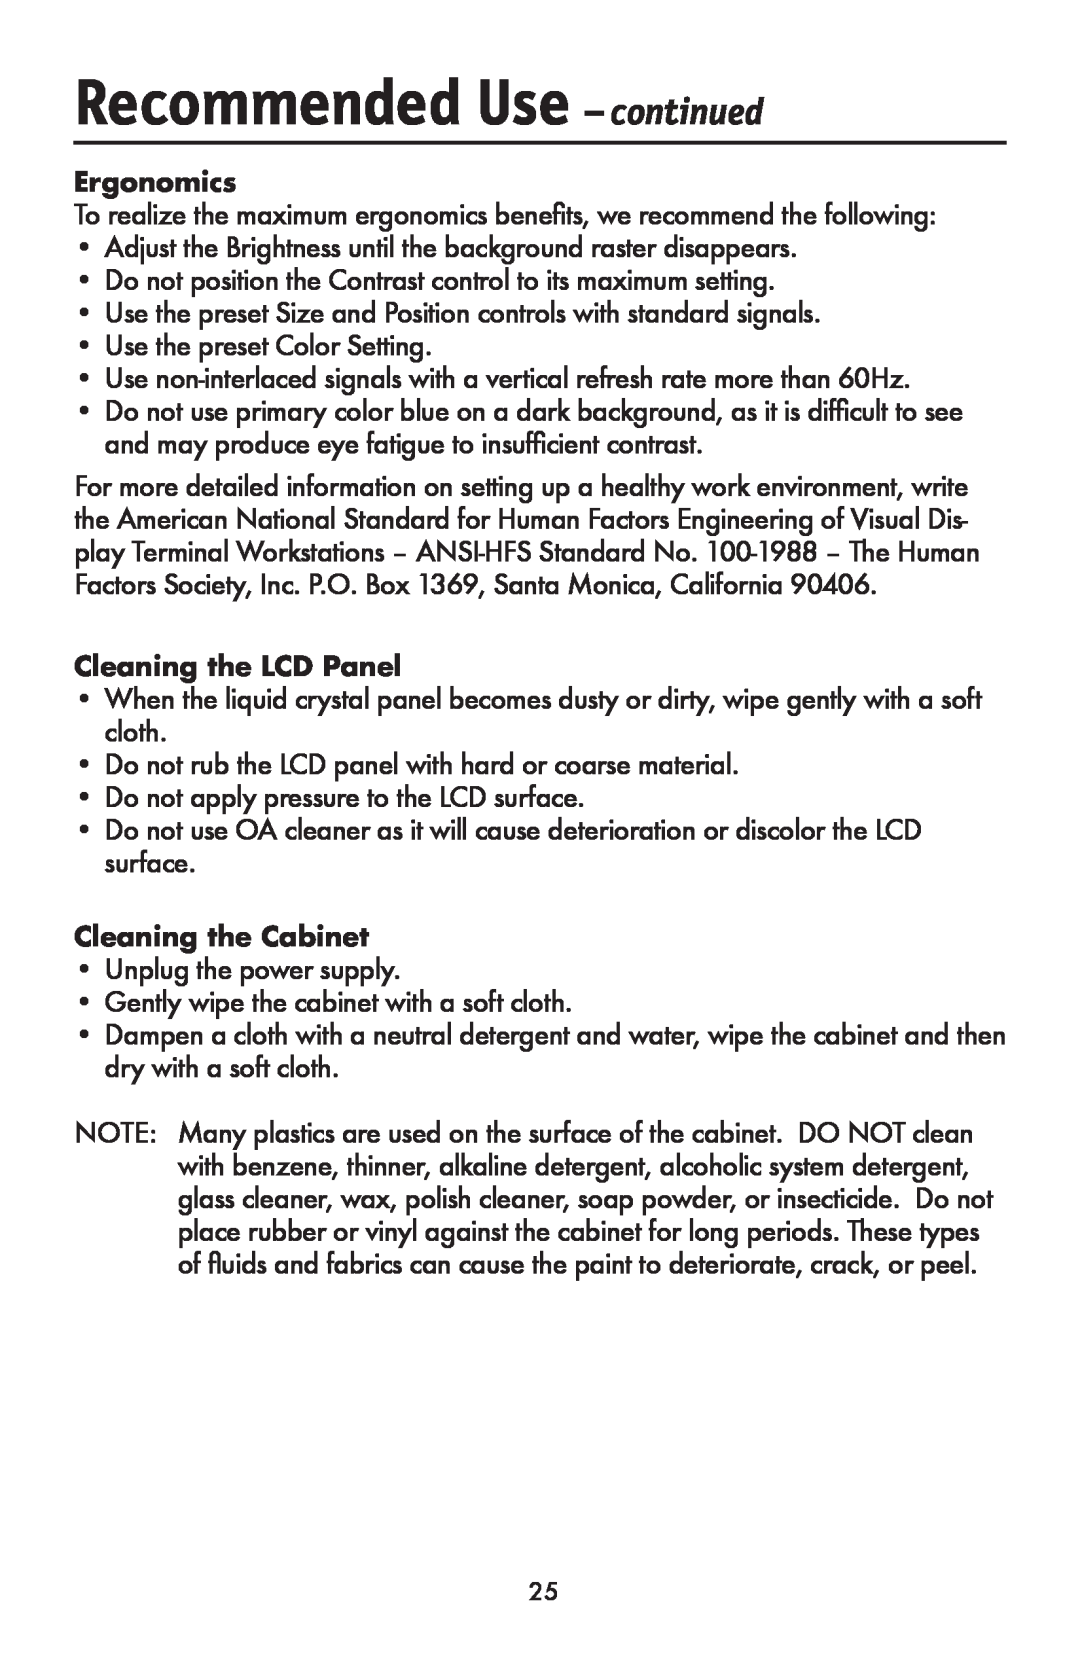 NEC LCD1990FXTM user manual Ergonomics, Cleaning the LCD Panel, Cleaning the Cabinet, Recommended Use - continued 